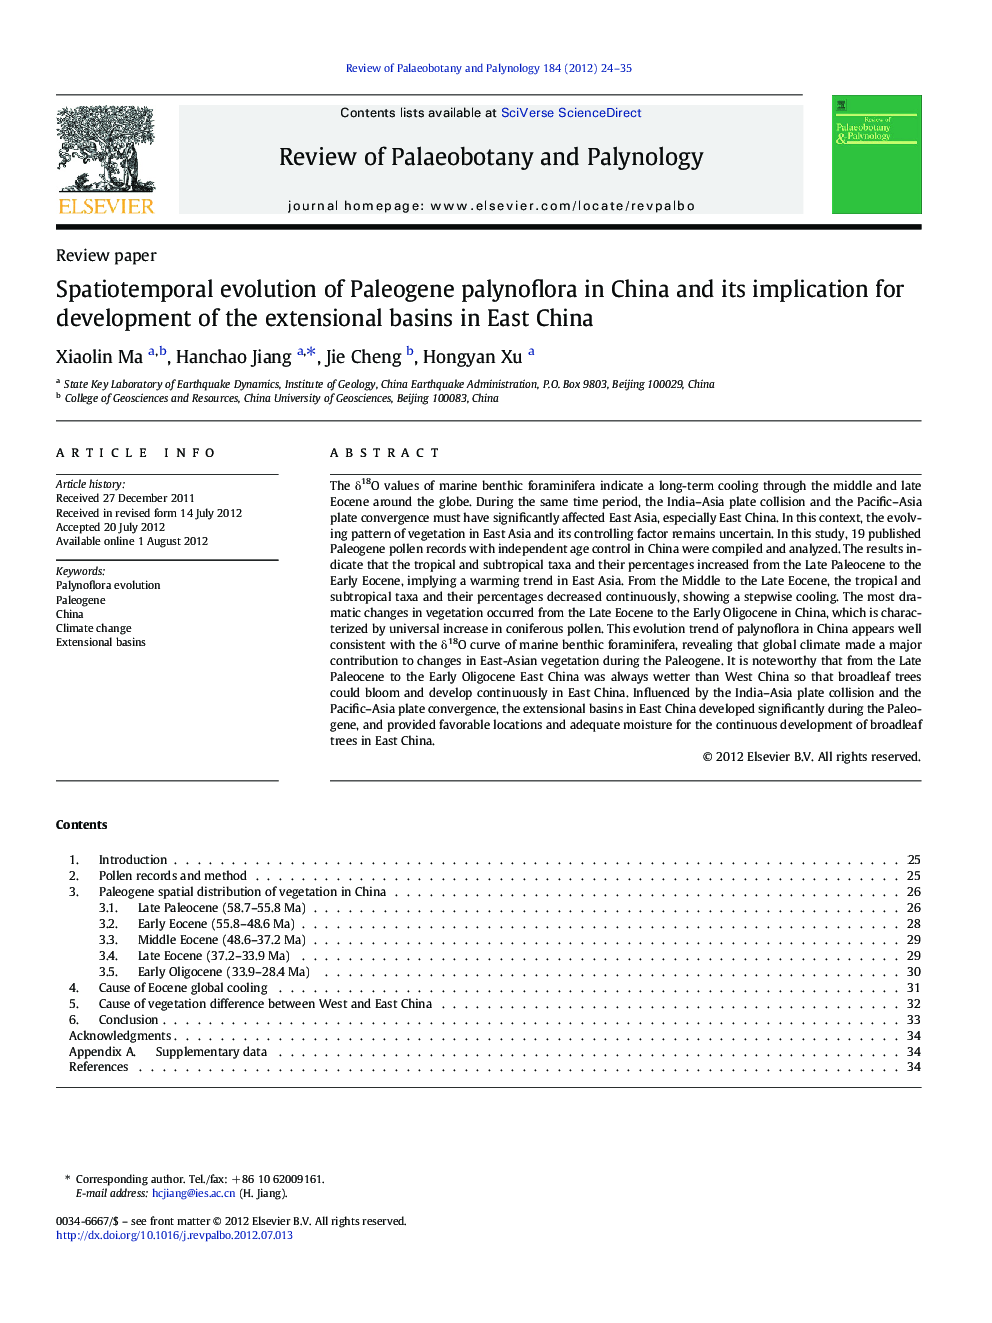 Spatiotemporal evolution of Paleogene palynoflora in China and its implication for development of the extensional basins in East China